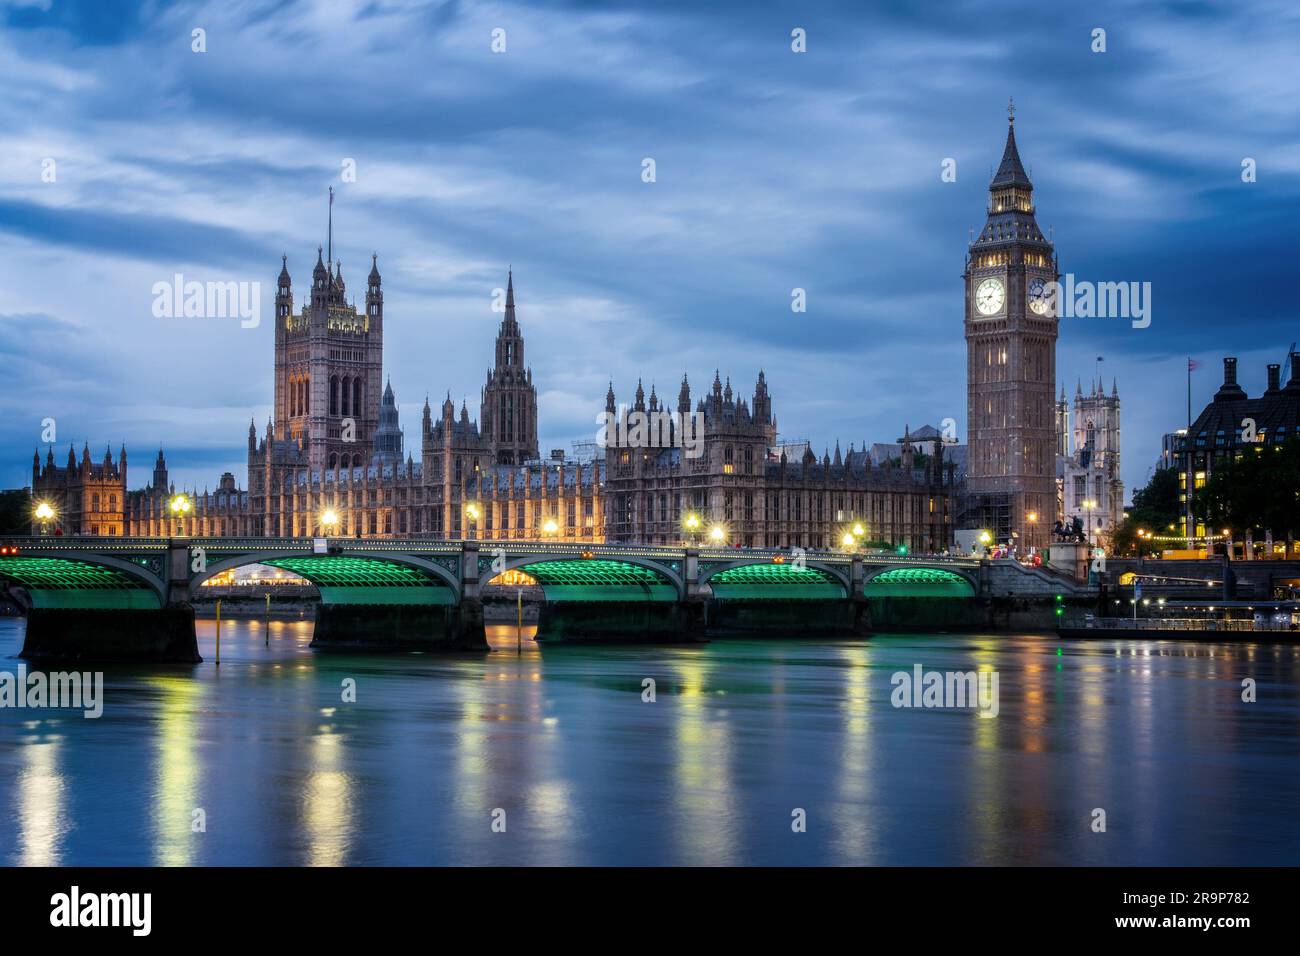 View of Westminster palace and bridge over river Thames with Big Ben illuminated at night in London, UK Stock Photo